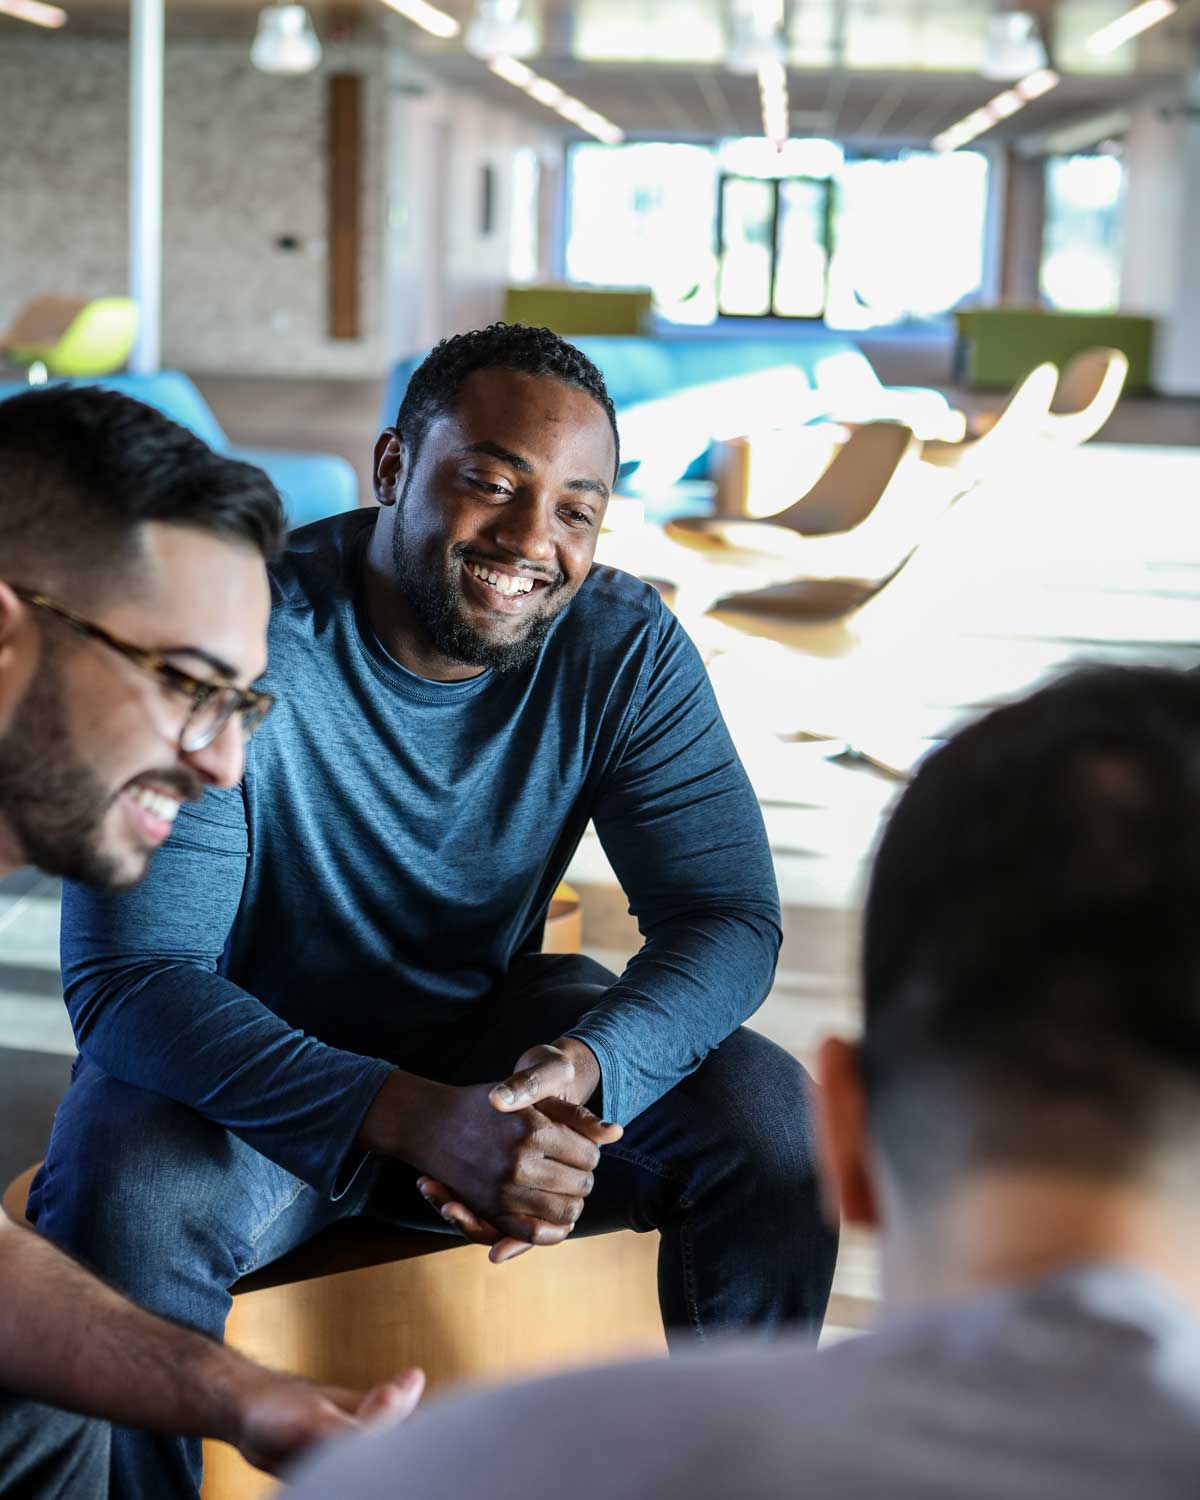 What is positive psychology? It is a discipline focused on happiness, resilence and quality of life. Here, a male student is smiling while talking with other students.